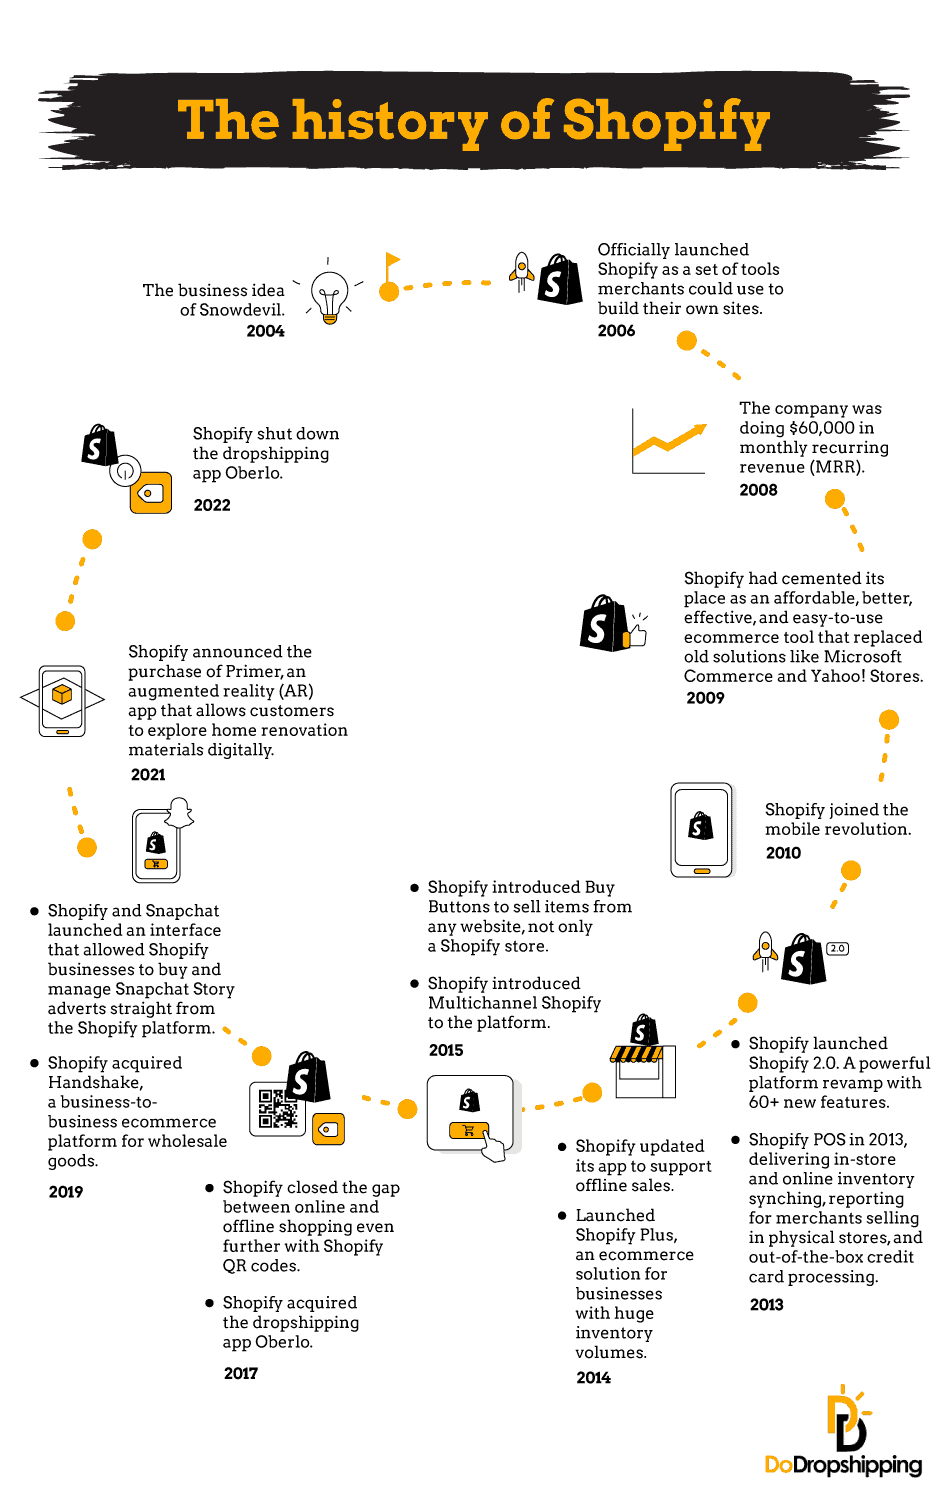 The history of Shopify - Infographic